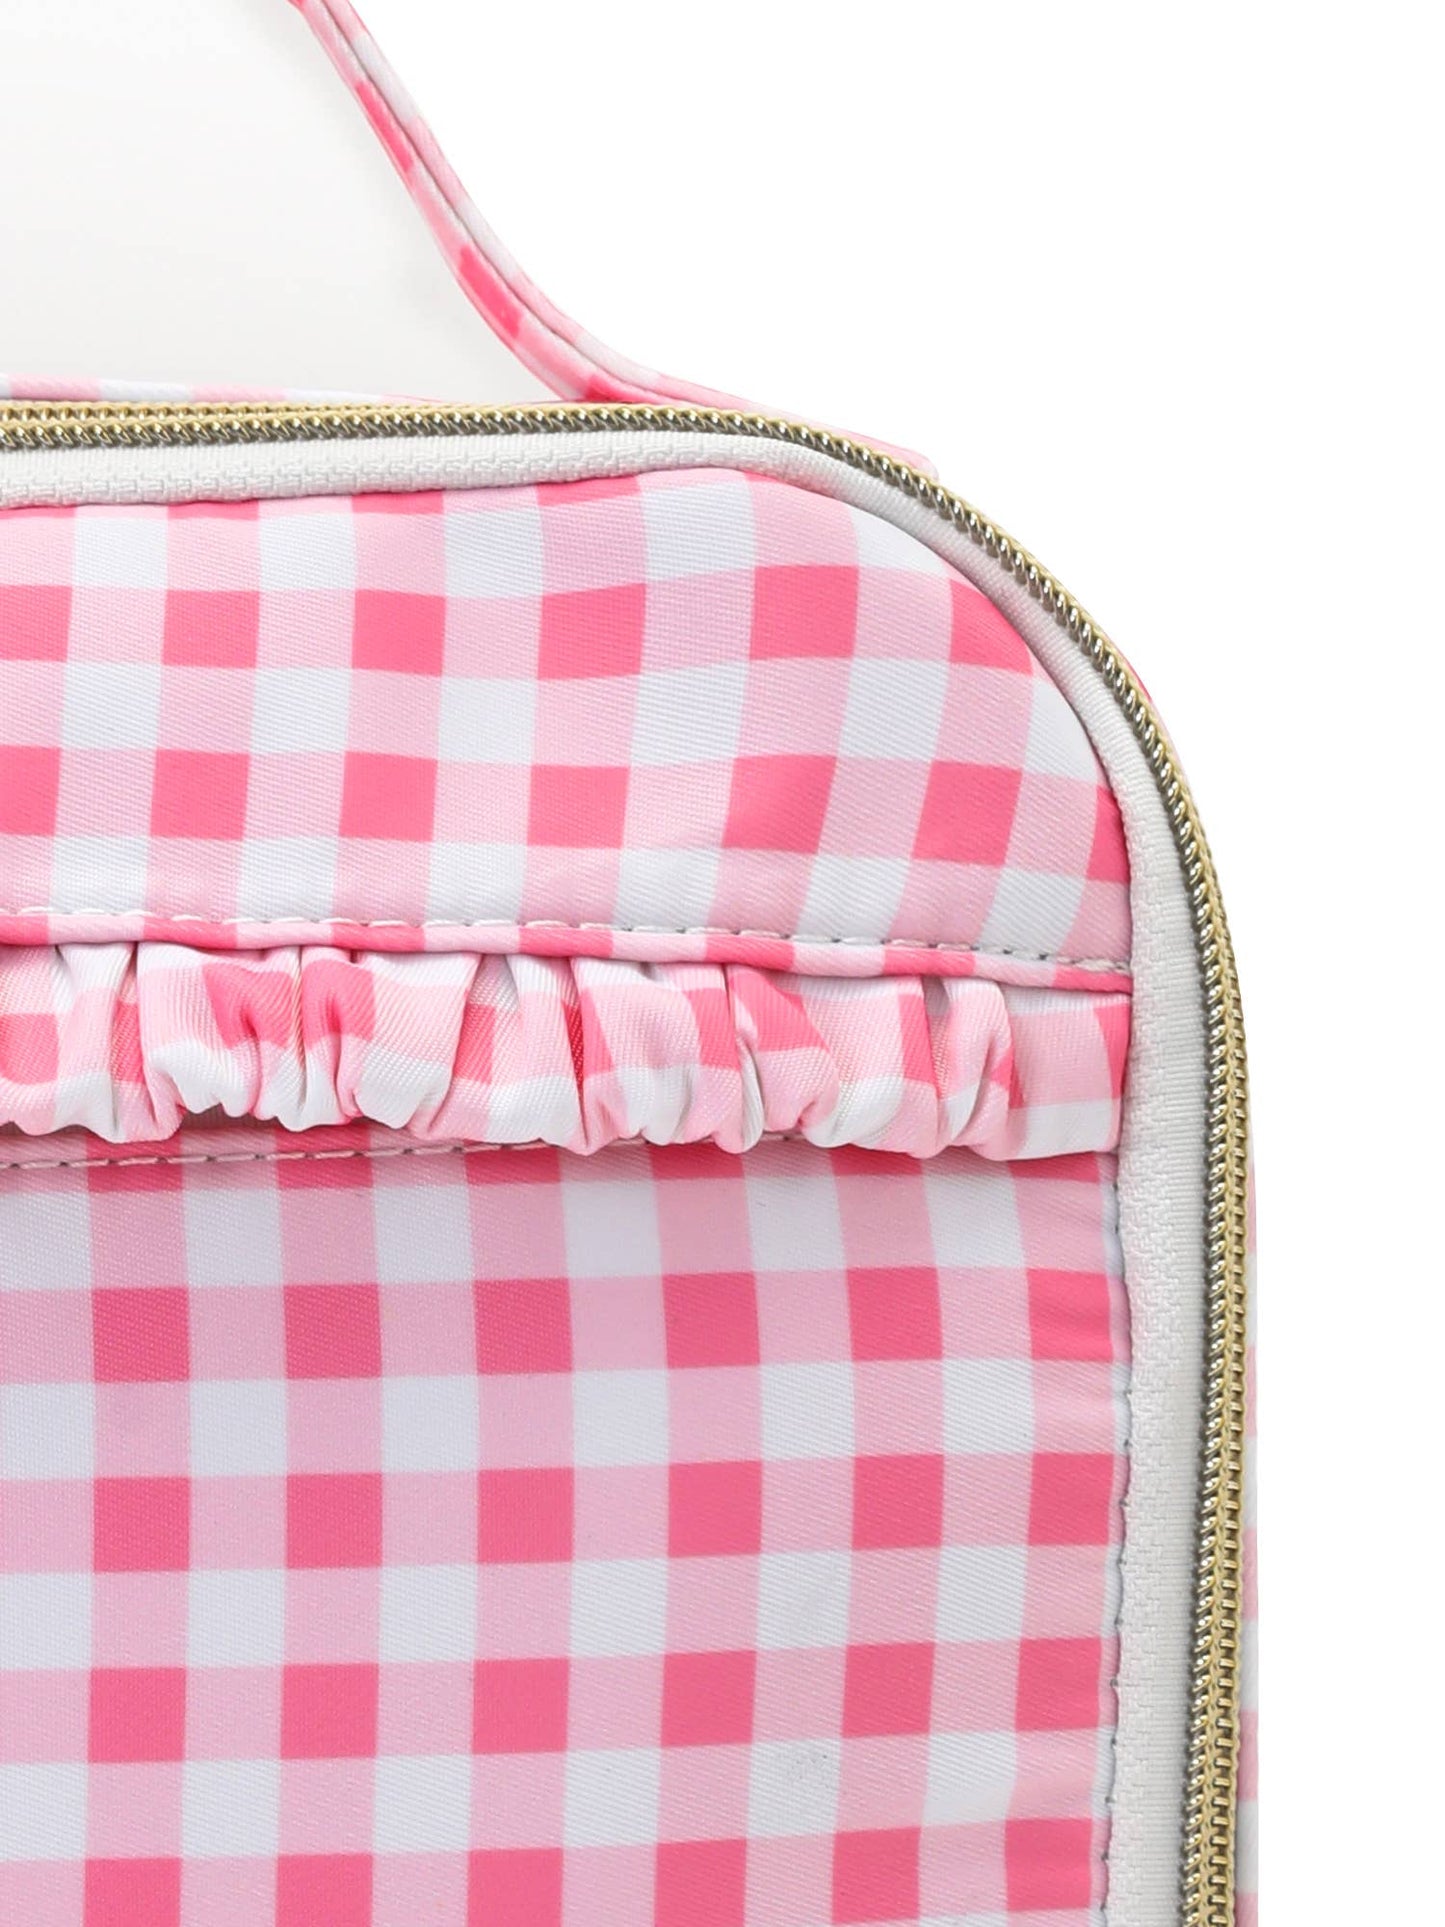 Pink Plaid Ruffle Baby Girls Lunch Boxes Bag